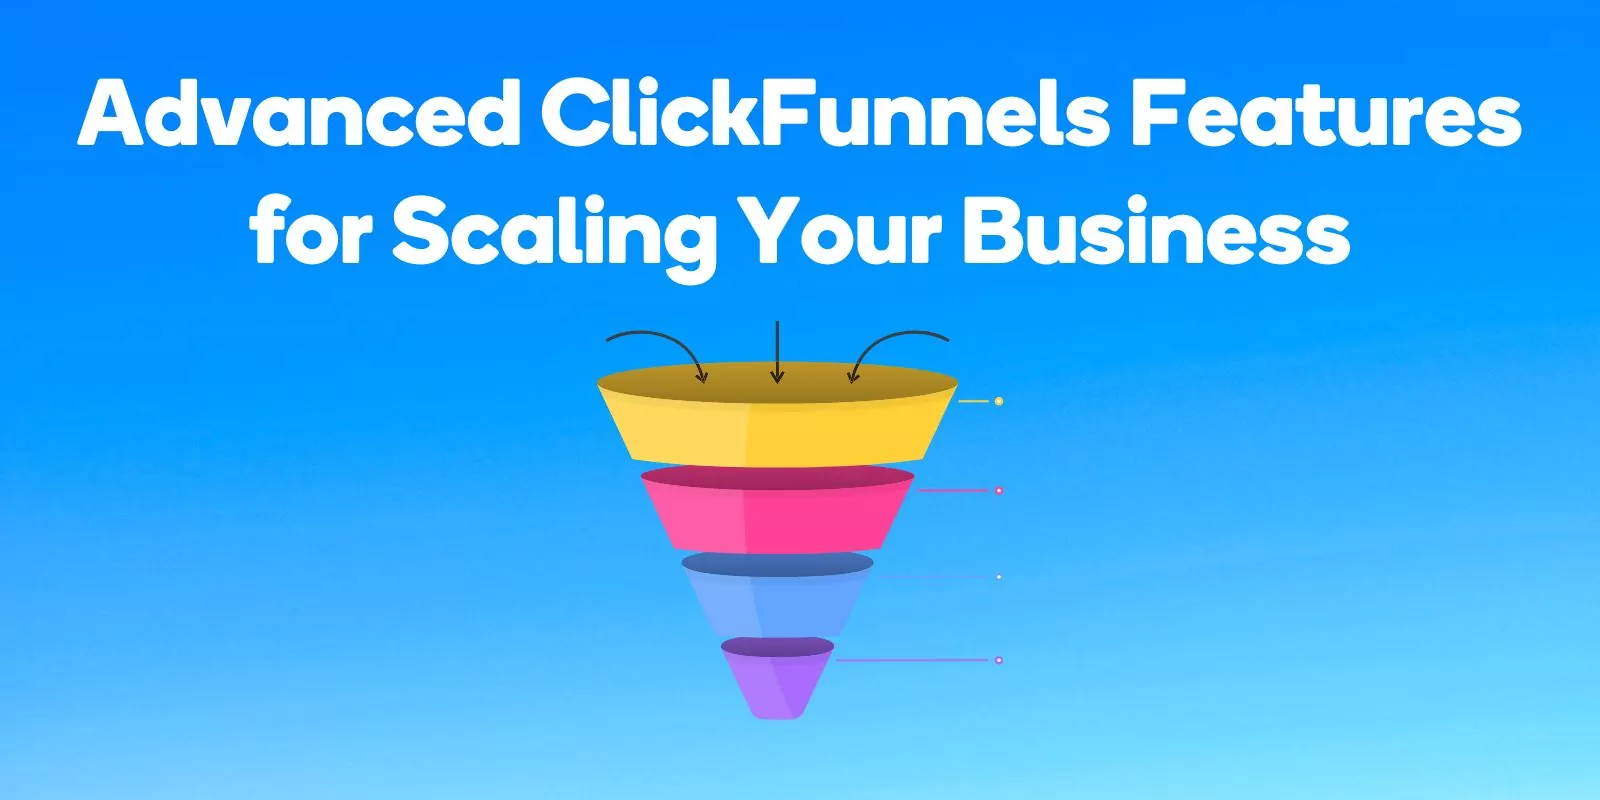 Advanced ClickFunnels Features for Scaling Your Business